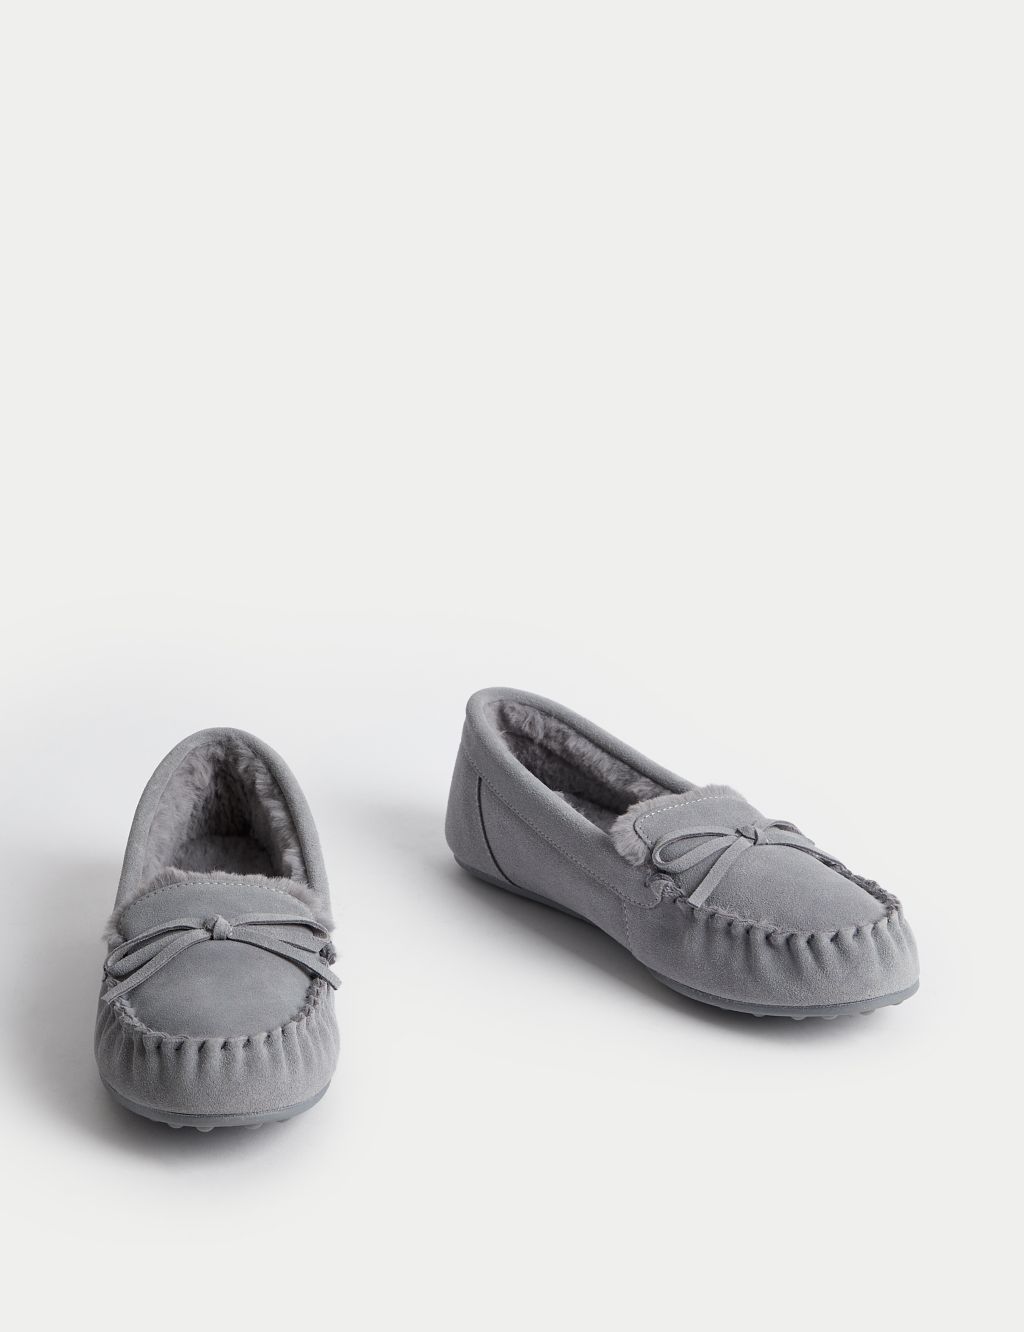 Suede Bow Faux Fur Lined Moccasin Slippers | M&S Collection | M&S